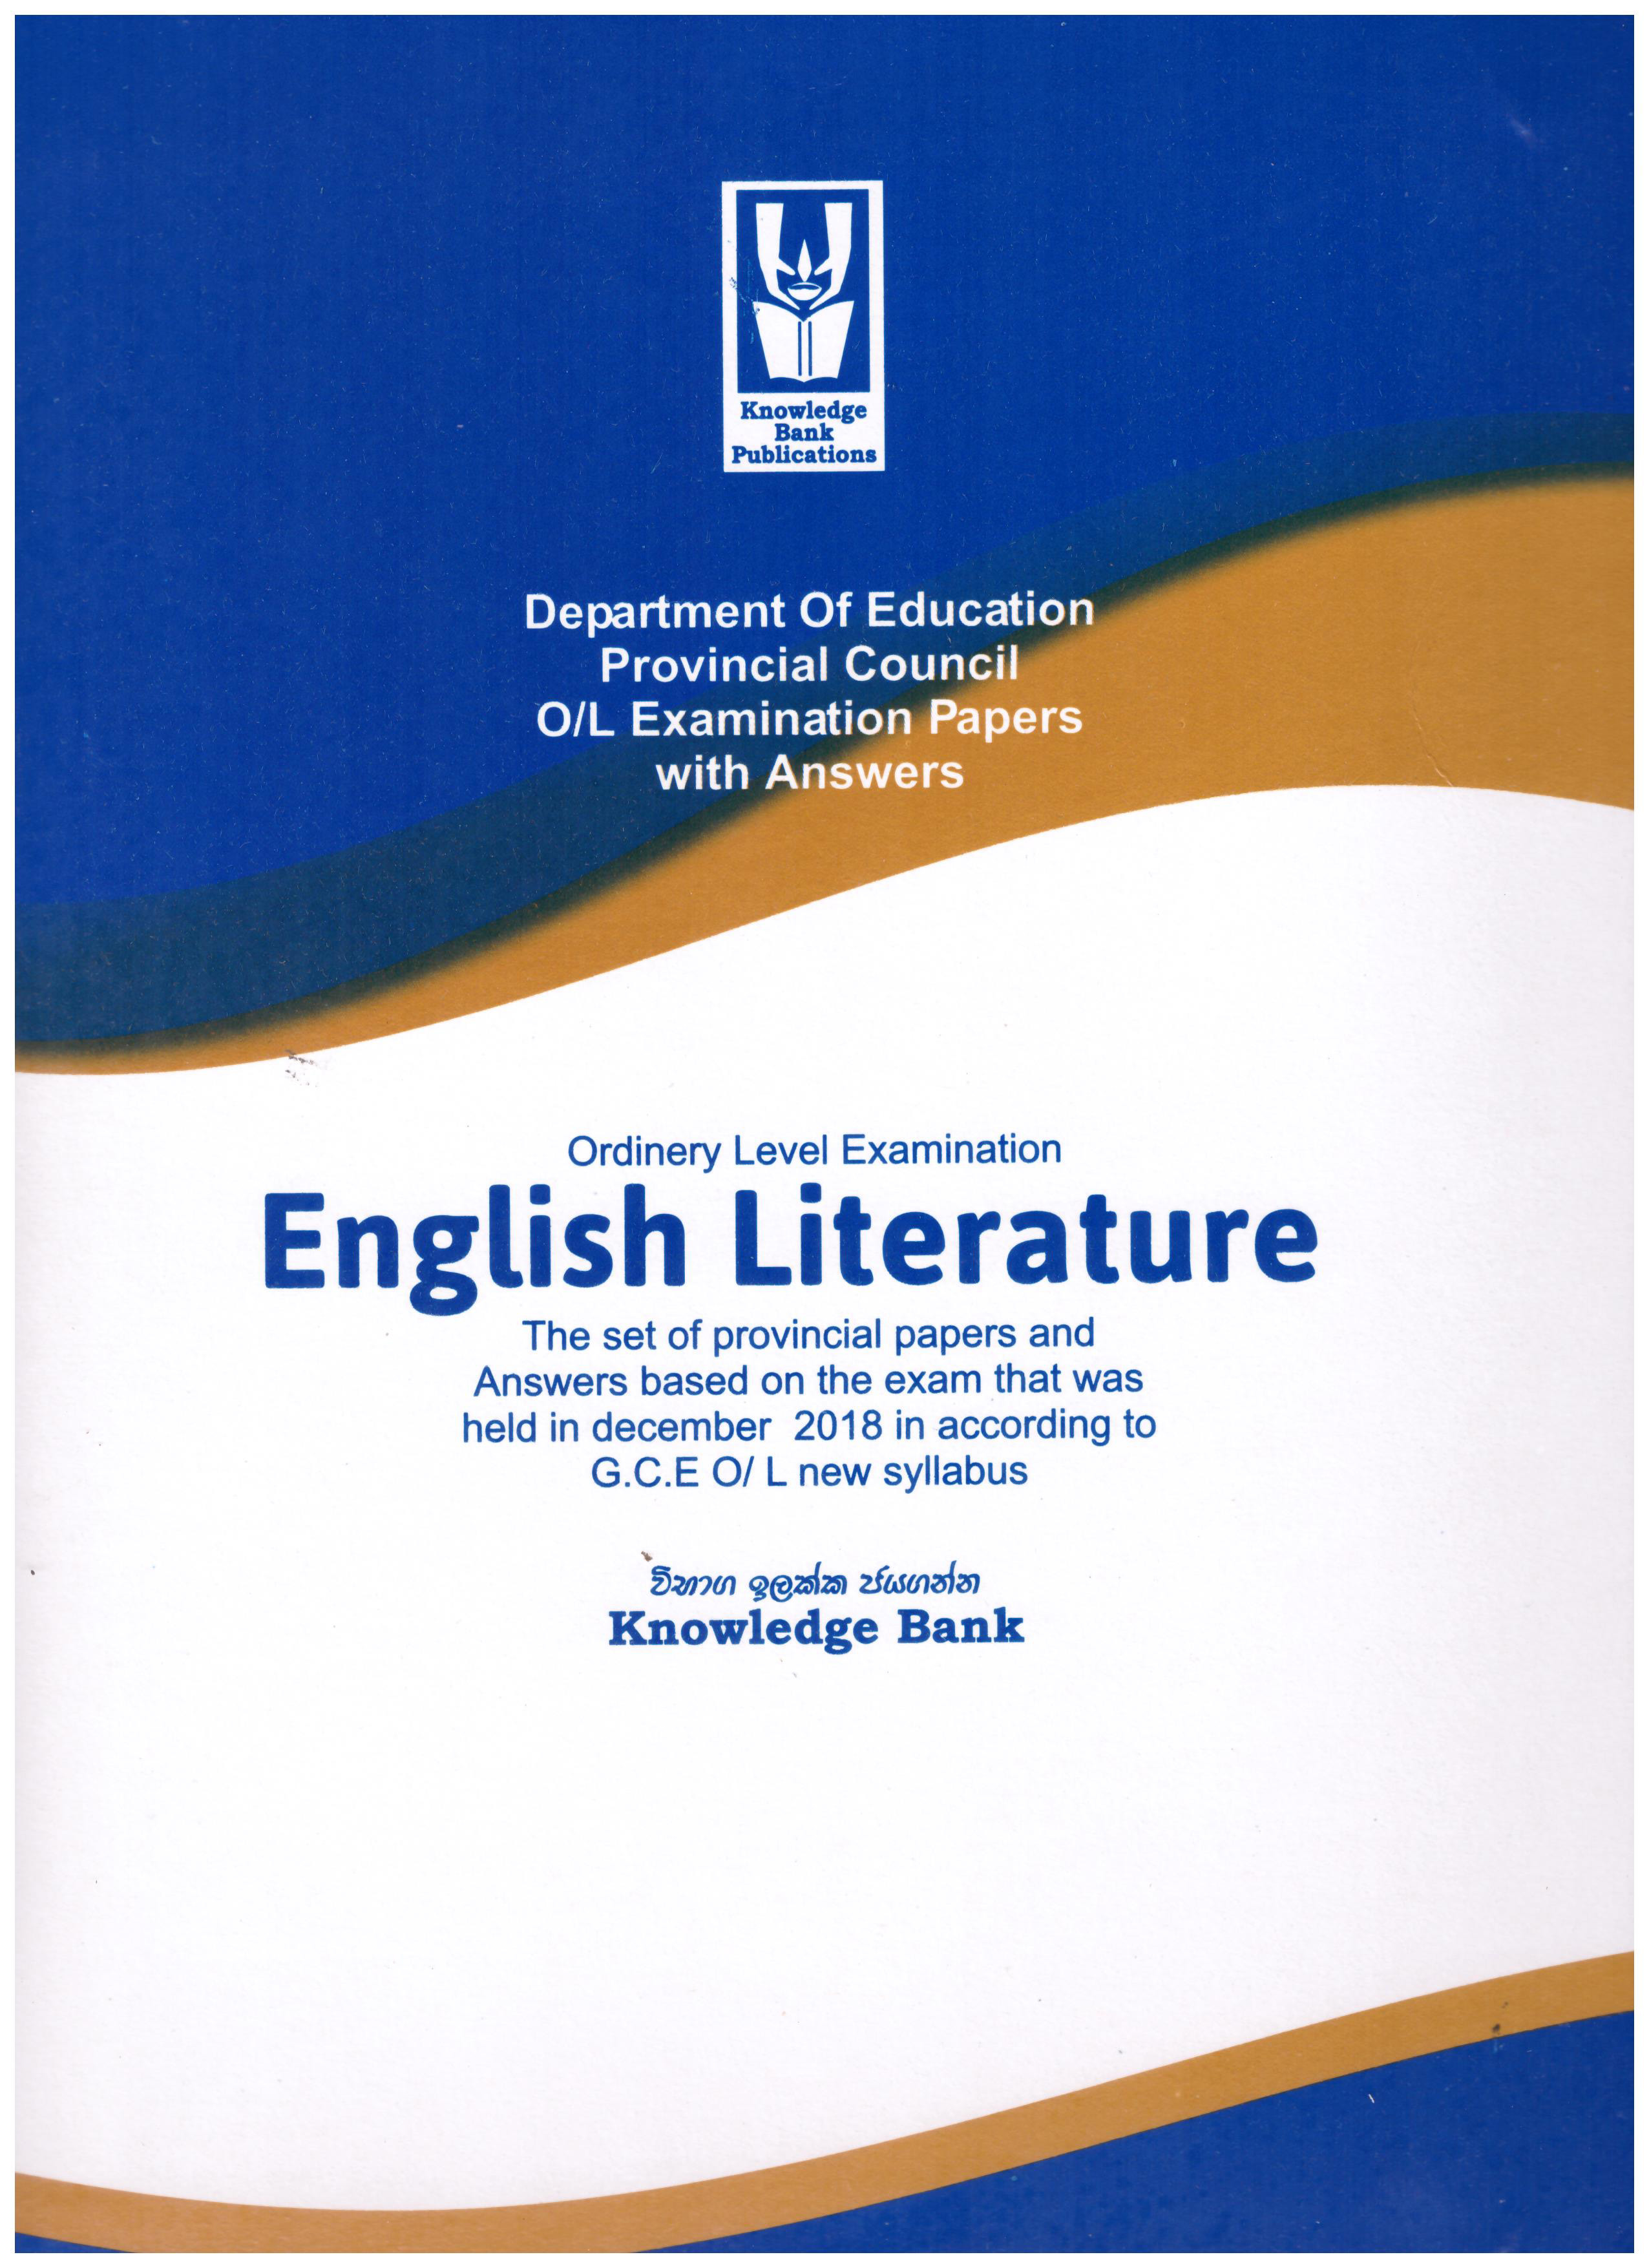 Knowledge Bank O/L English Literature ( Provincial Examination Papers )